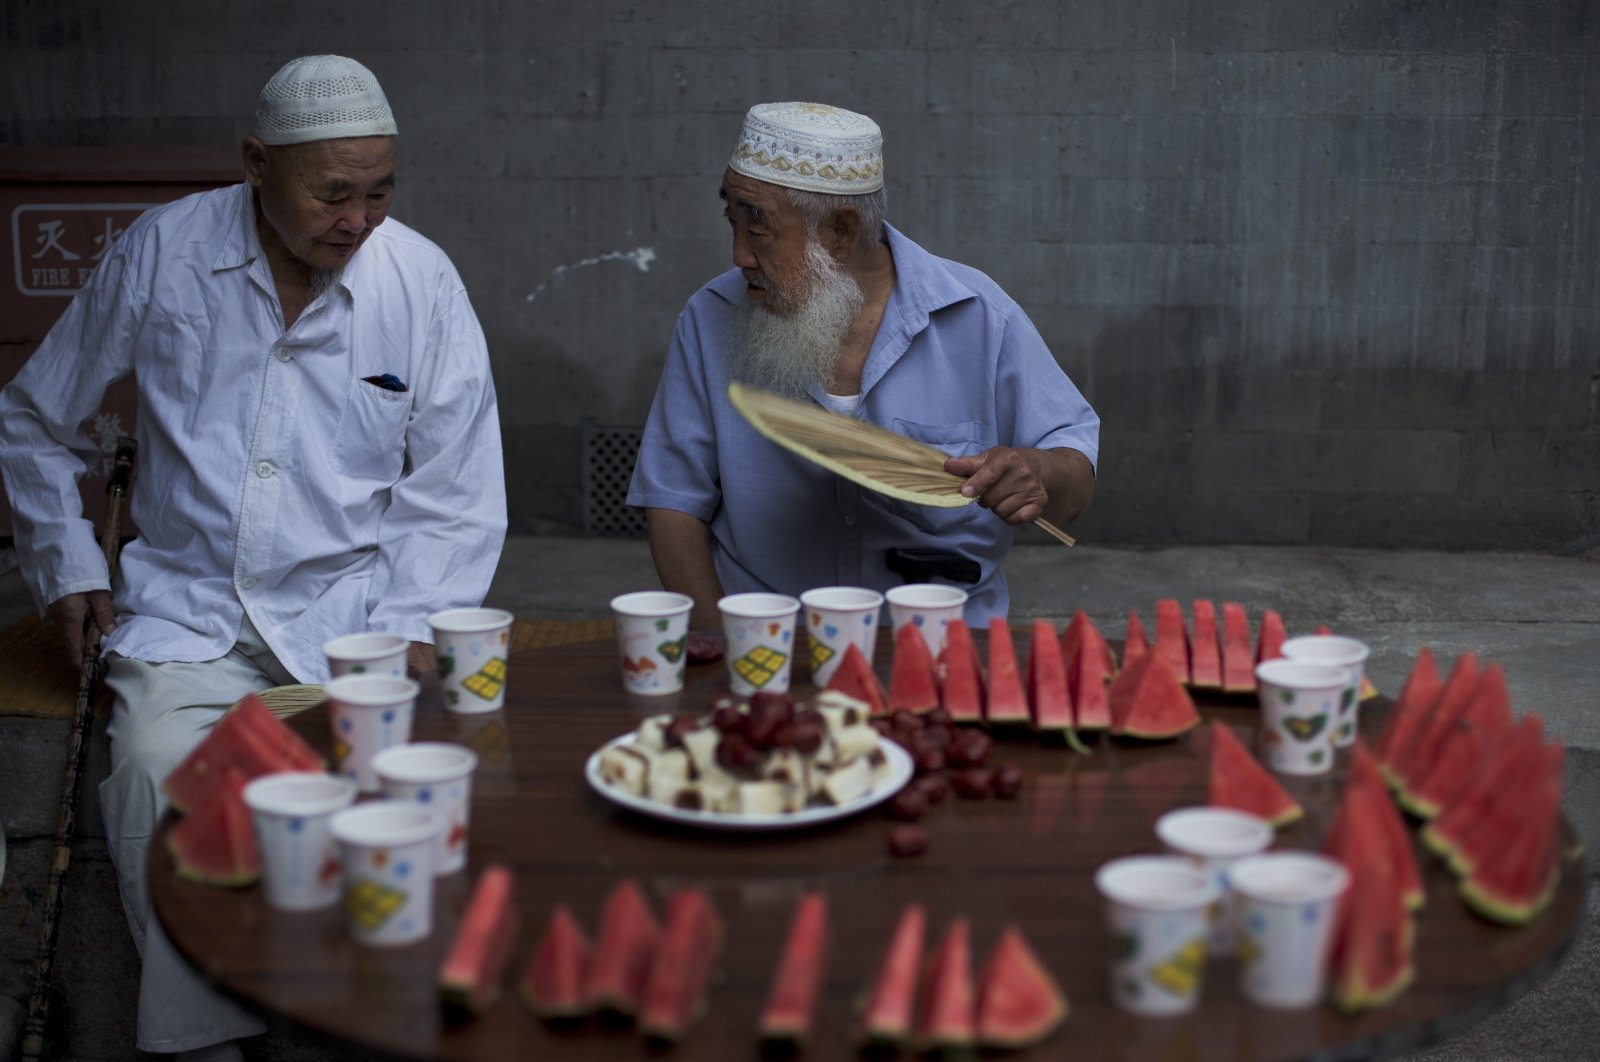 Chinese Muslim men chat as they wait for the time to break their fast during the Muslim holy month of Ramadan at the Niujie mosque, the oldest and largest mosque in Beijing, China, July 2, 2014. (AP Photo)